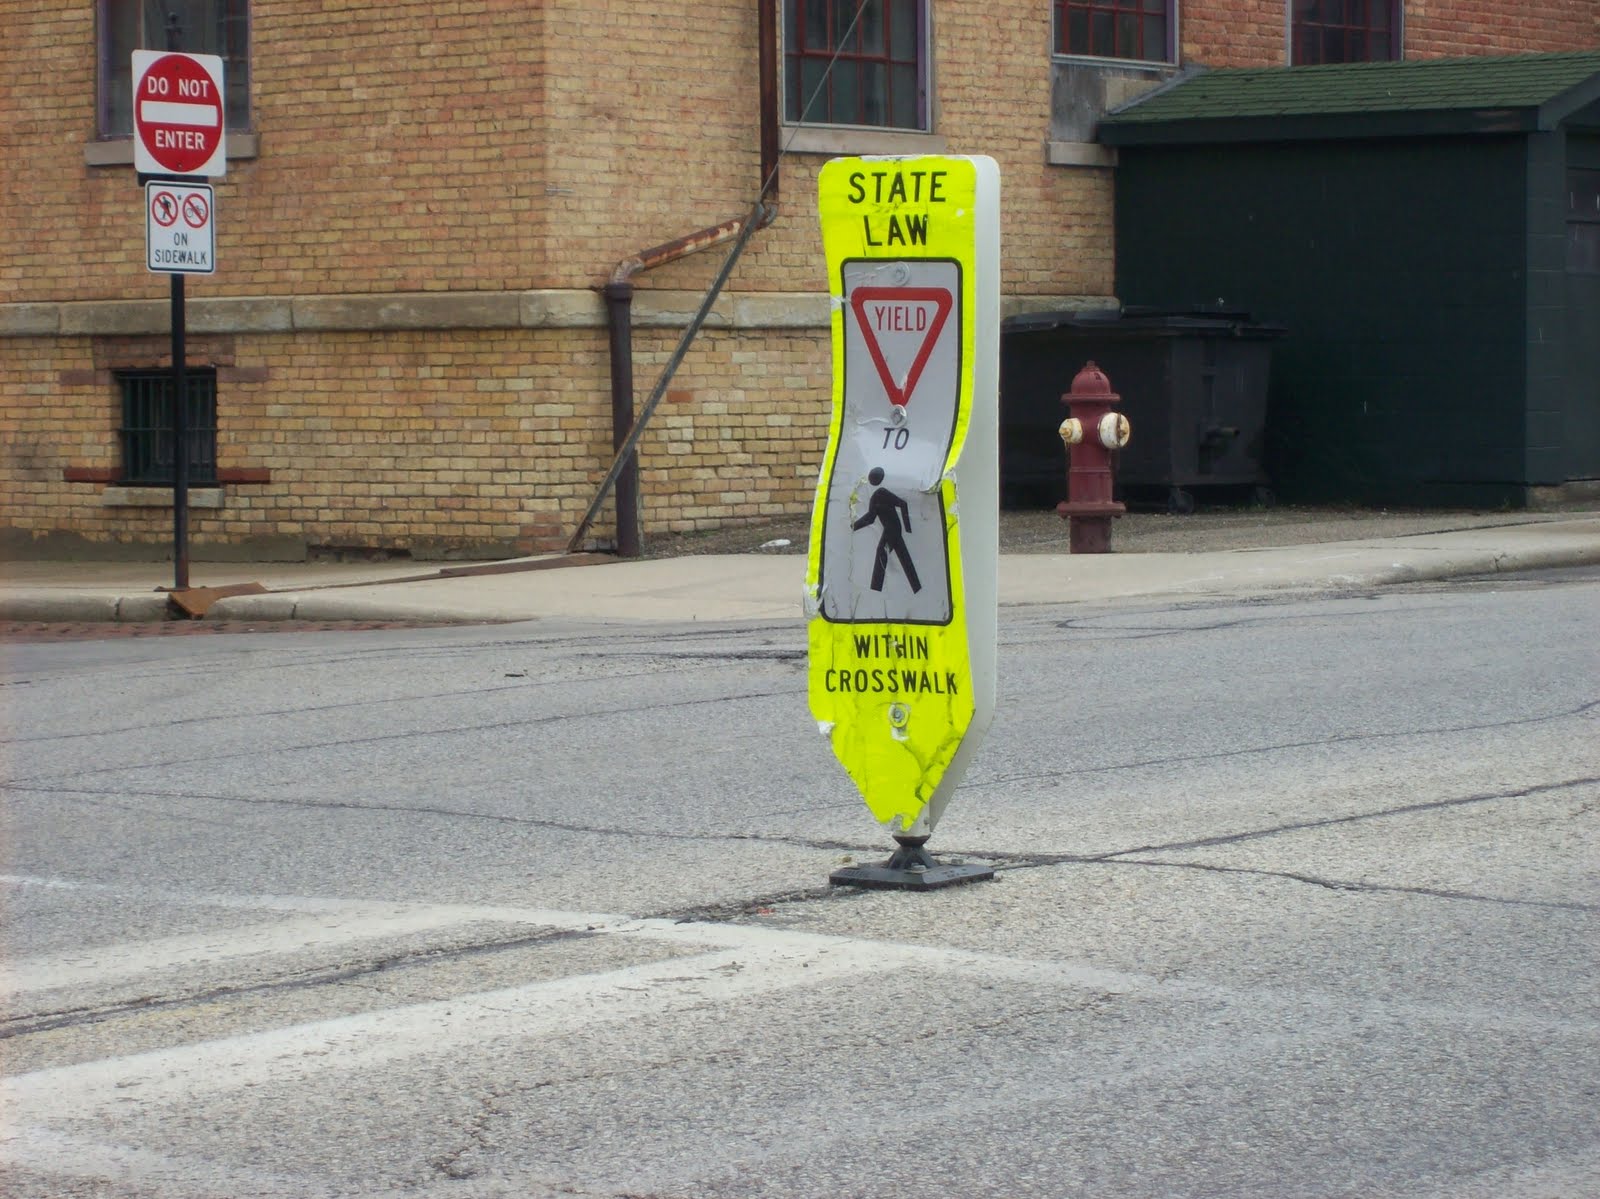 Careless drivers damage signs - The Crittenden Automotive Library